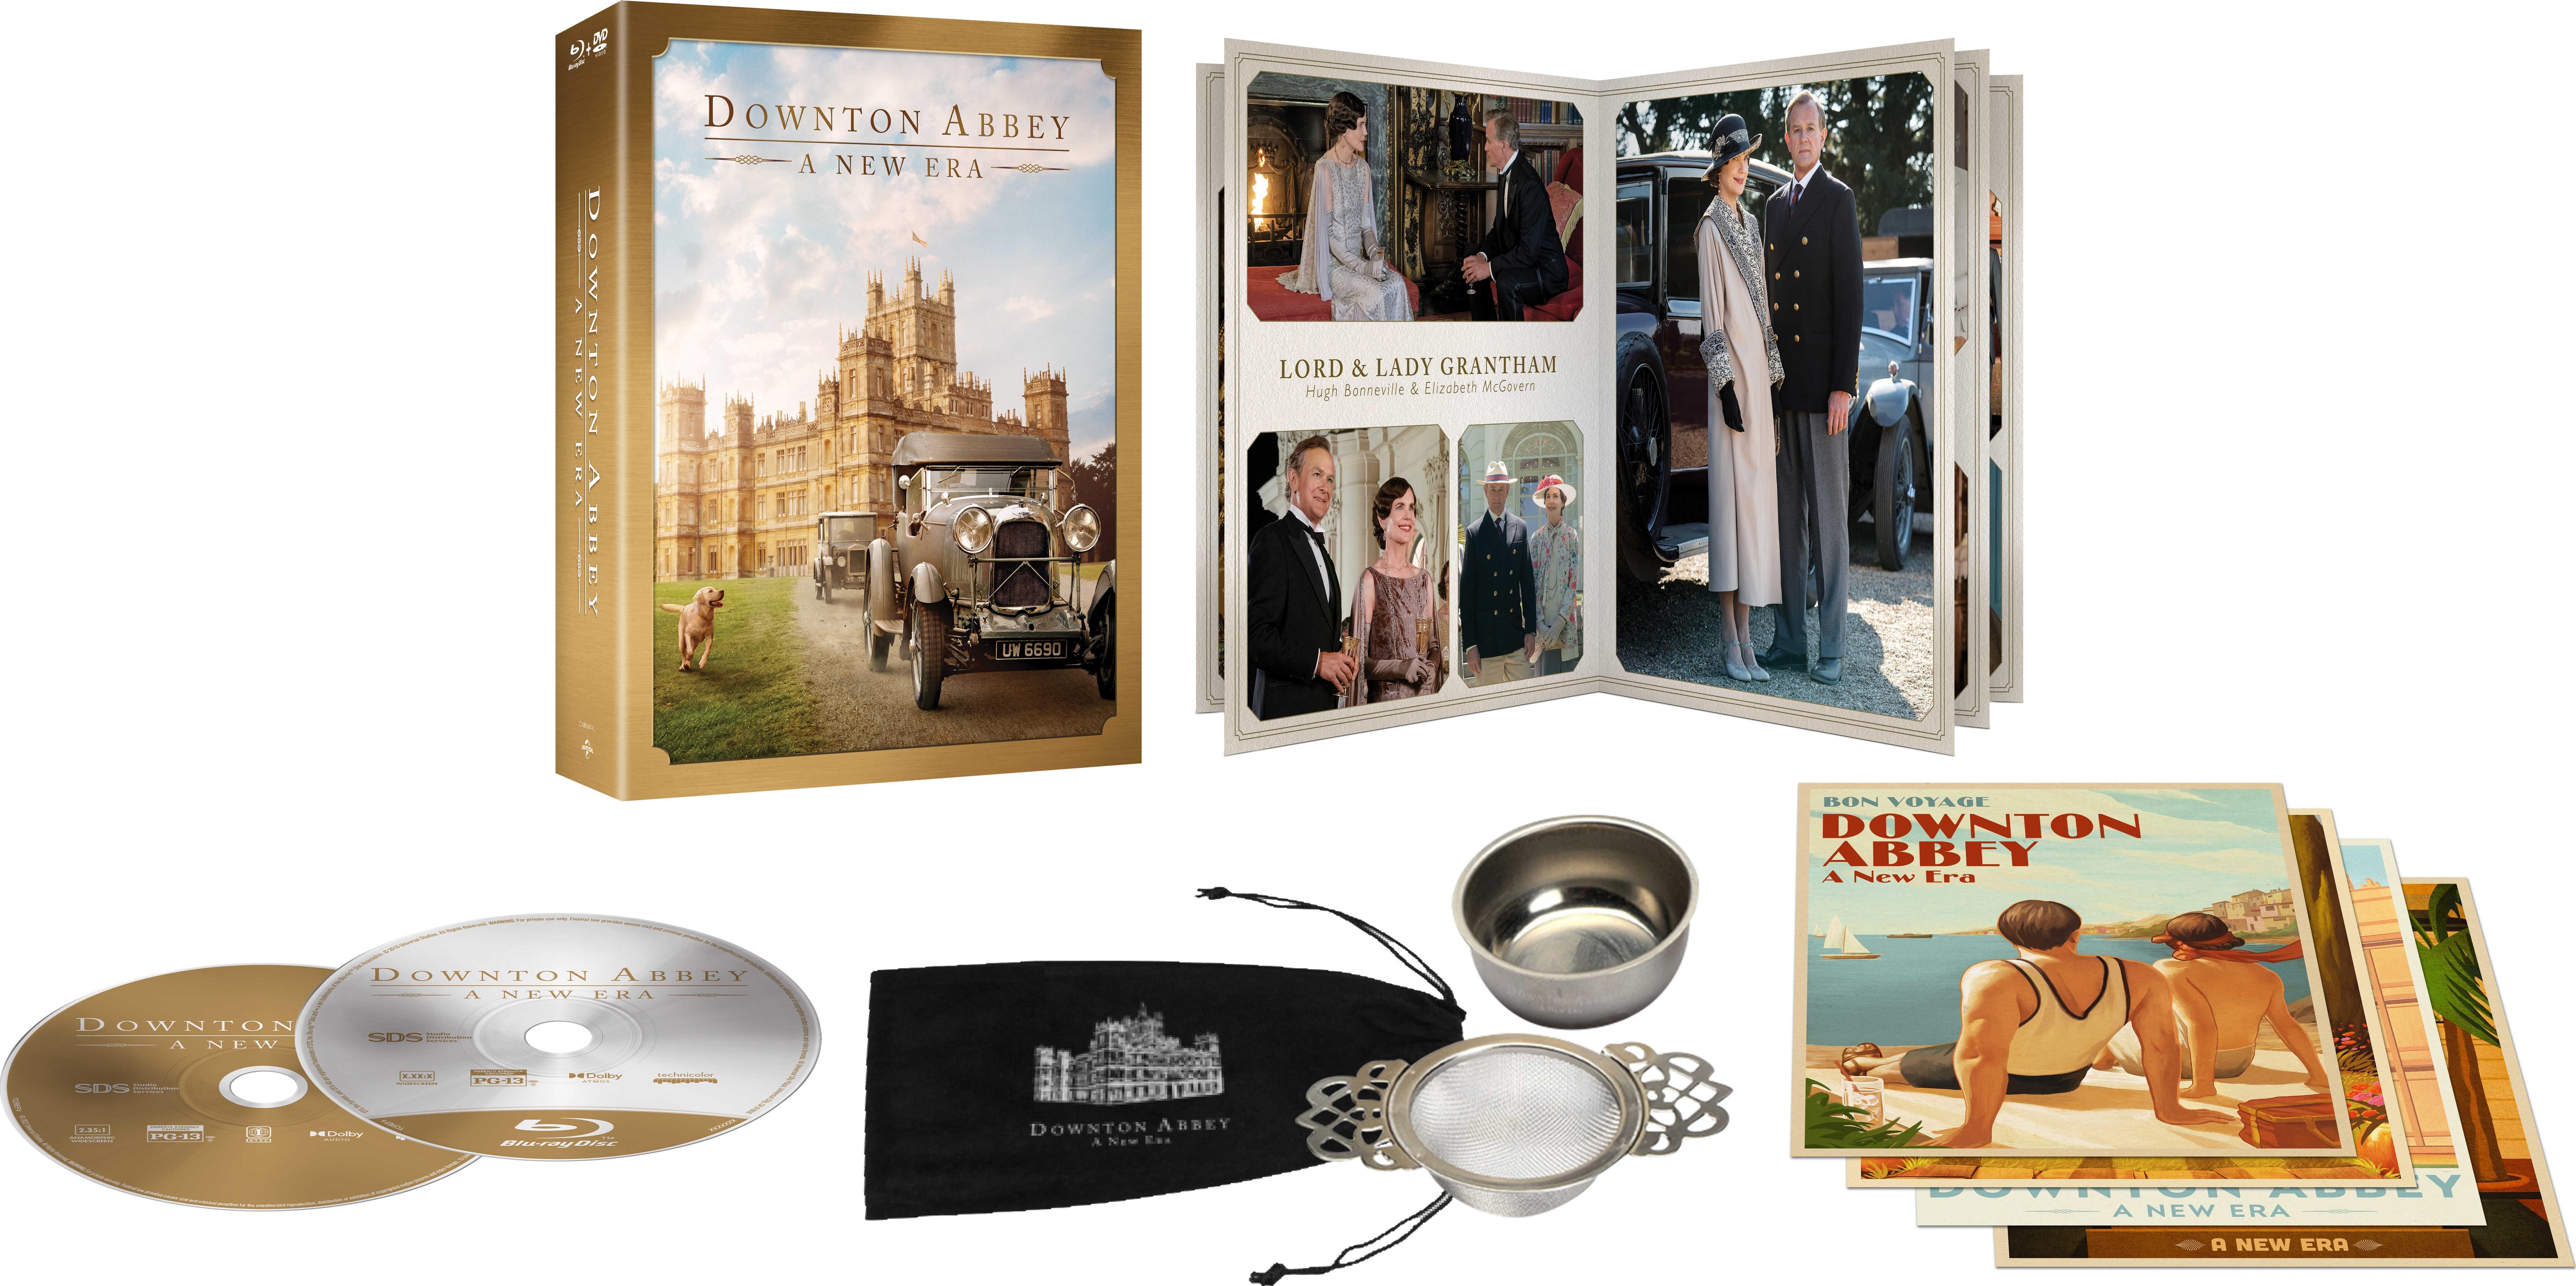 Downton Abbey: A New Era [Limited Edition Gift Set] Blu-ray Disc